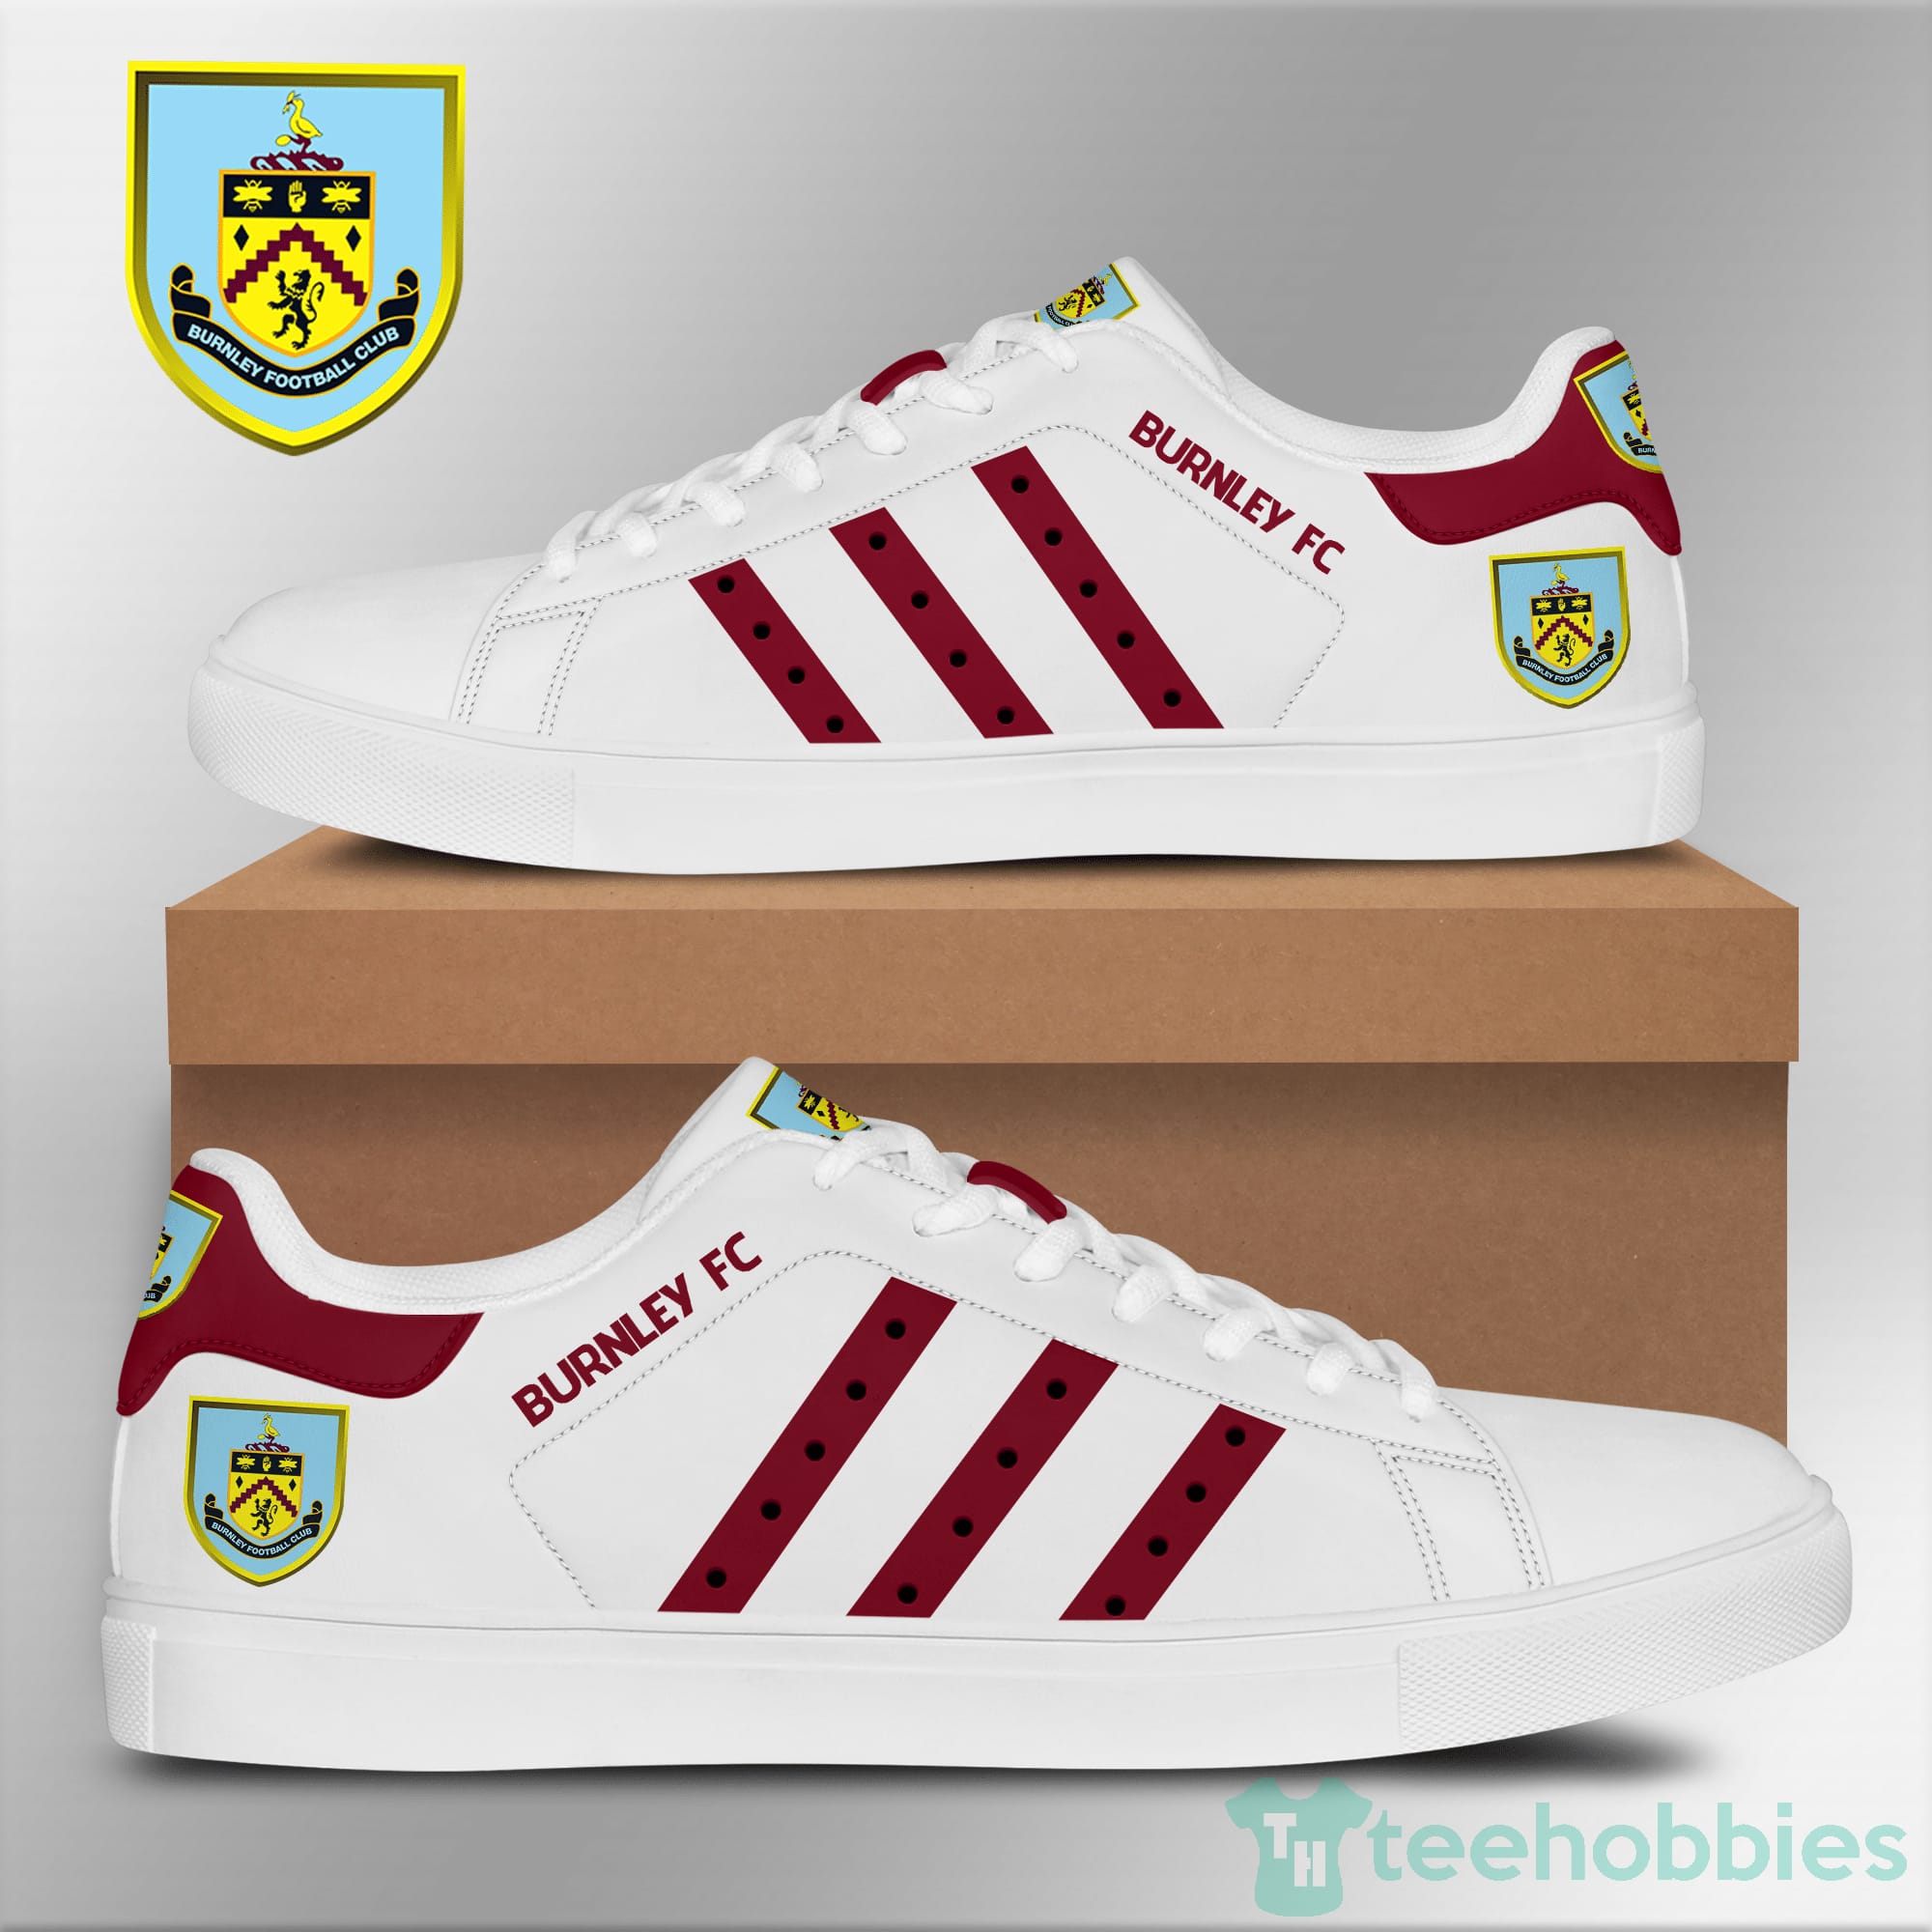 Burnley F.C White Low Top Skate Shoes